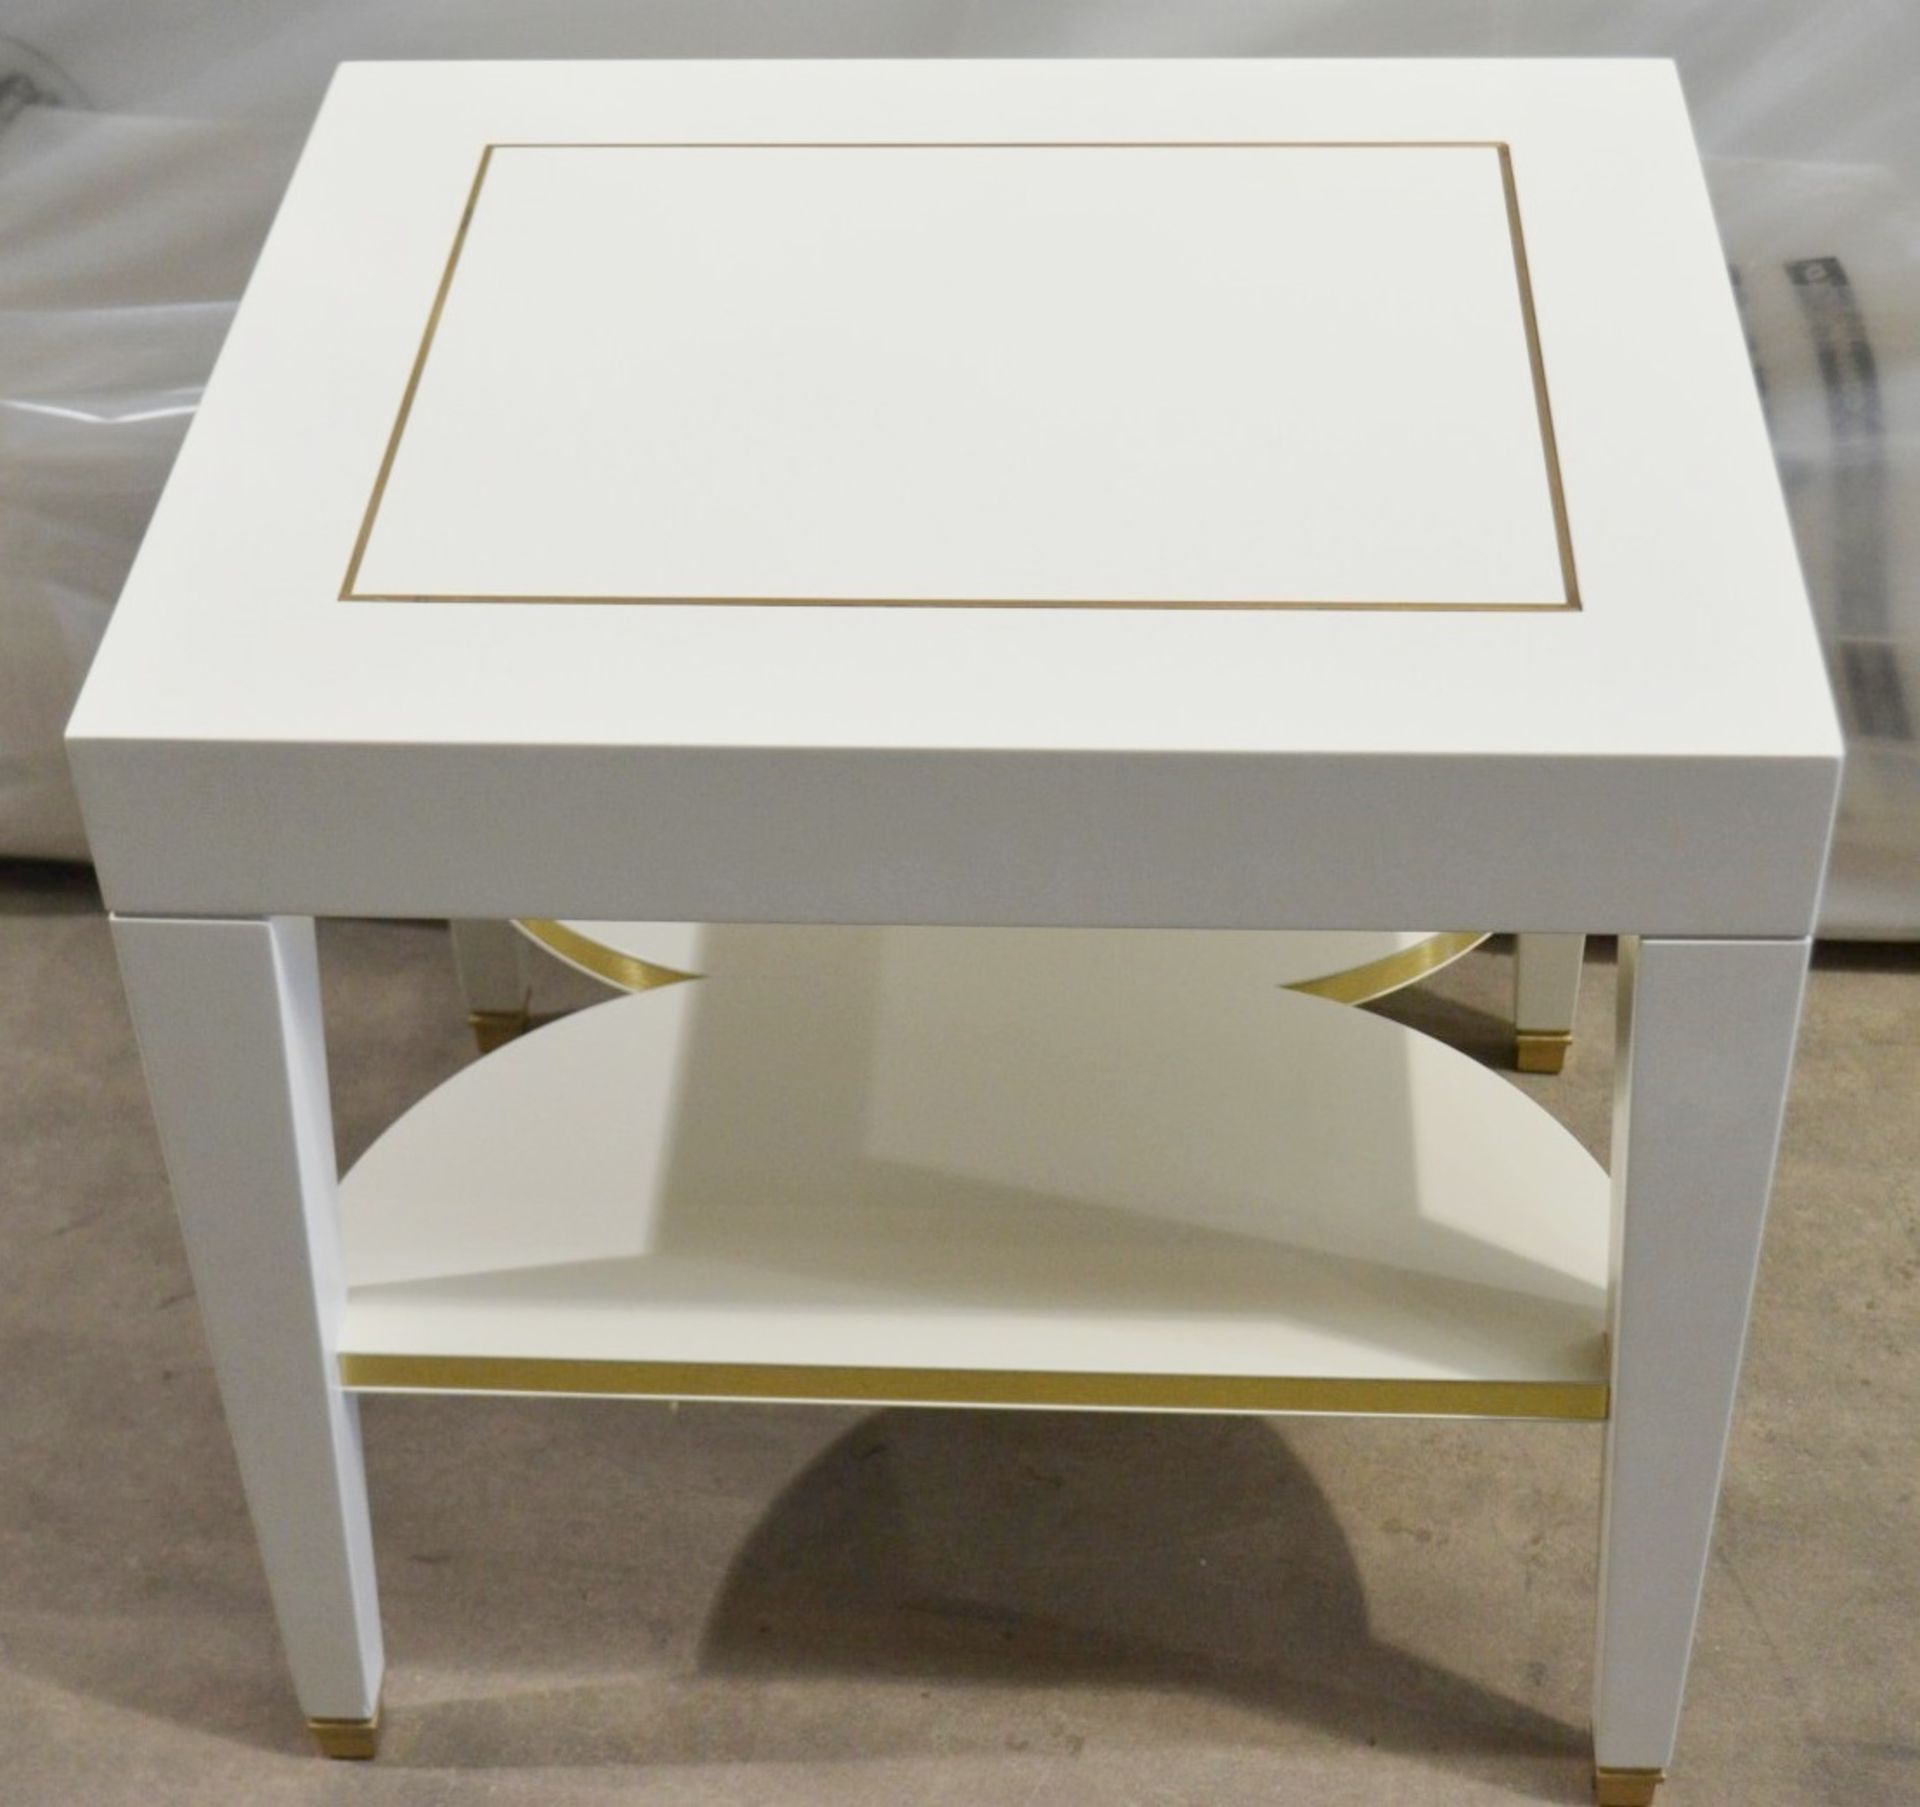 1 x JUSTIN VAN BREDA 'Alexander' Mahogany Occasional Side Table In Cream - Dimensions: W60 x D50 x H - Image 3 of 6